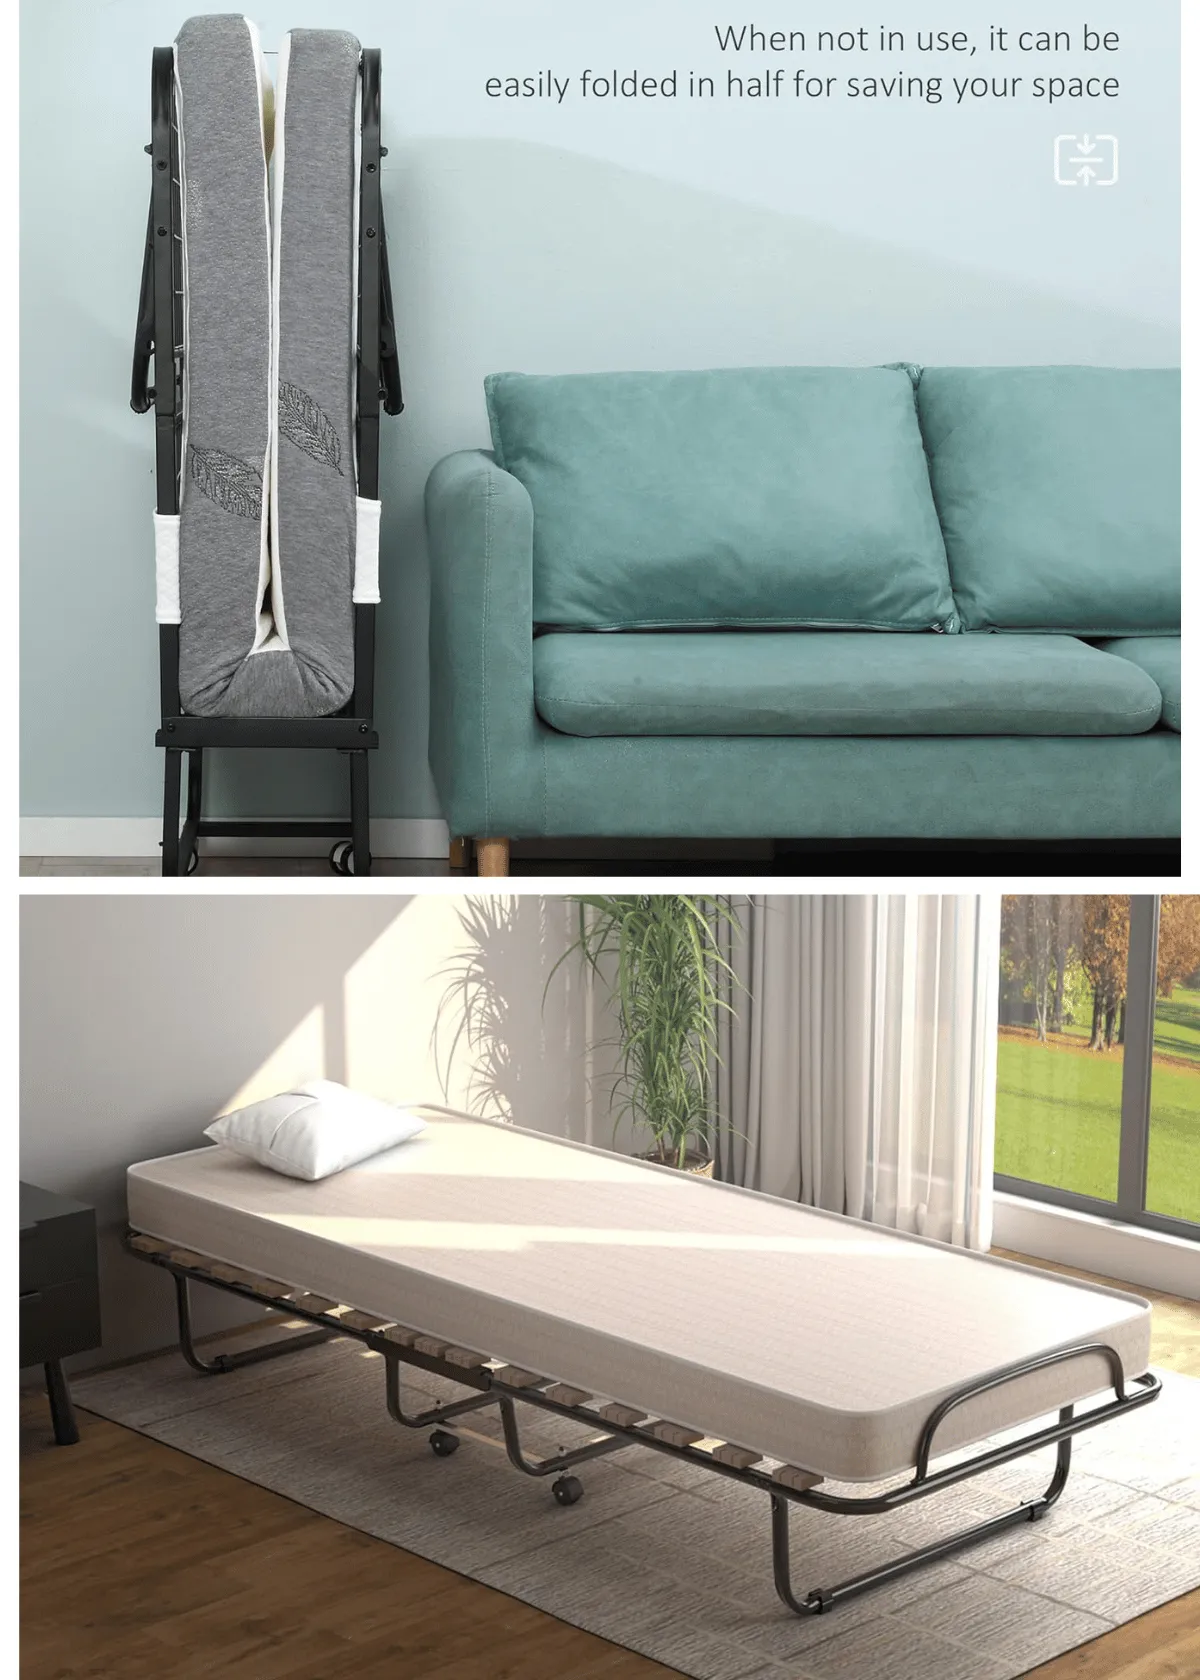 "How to Choose the Best Rollaway Bed Mattress for Small Spaces?"